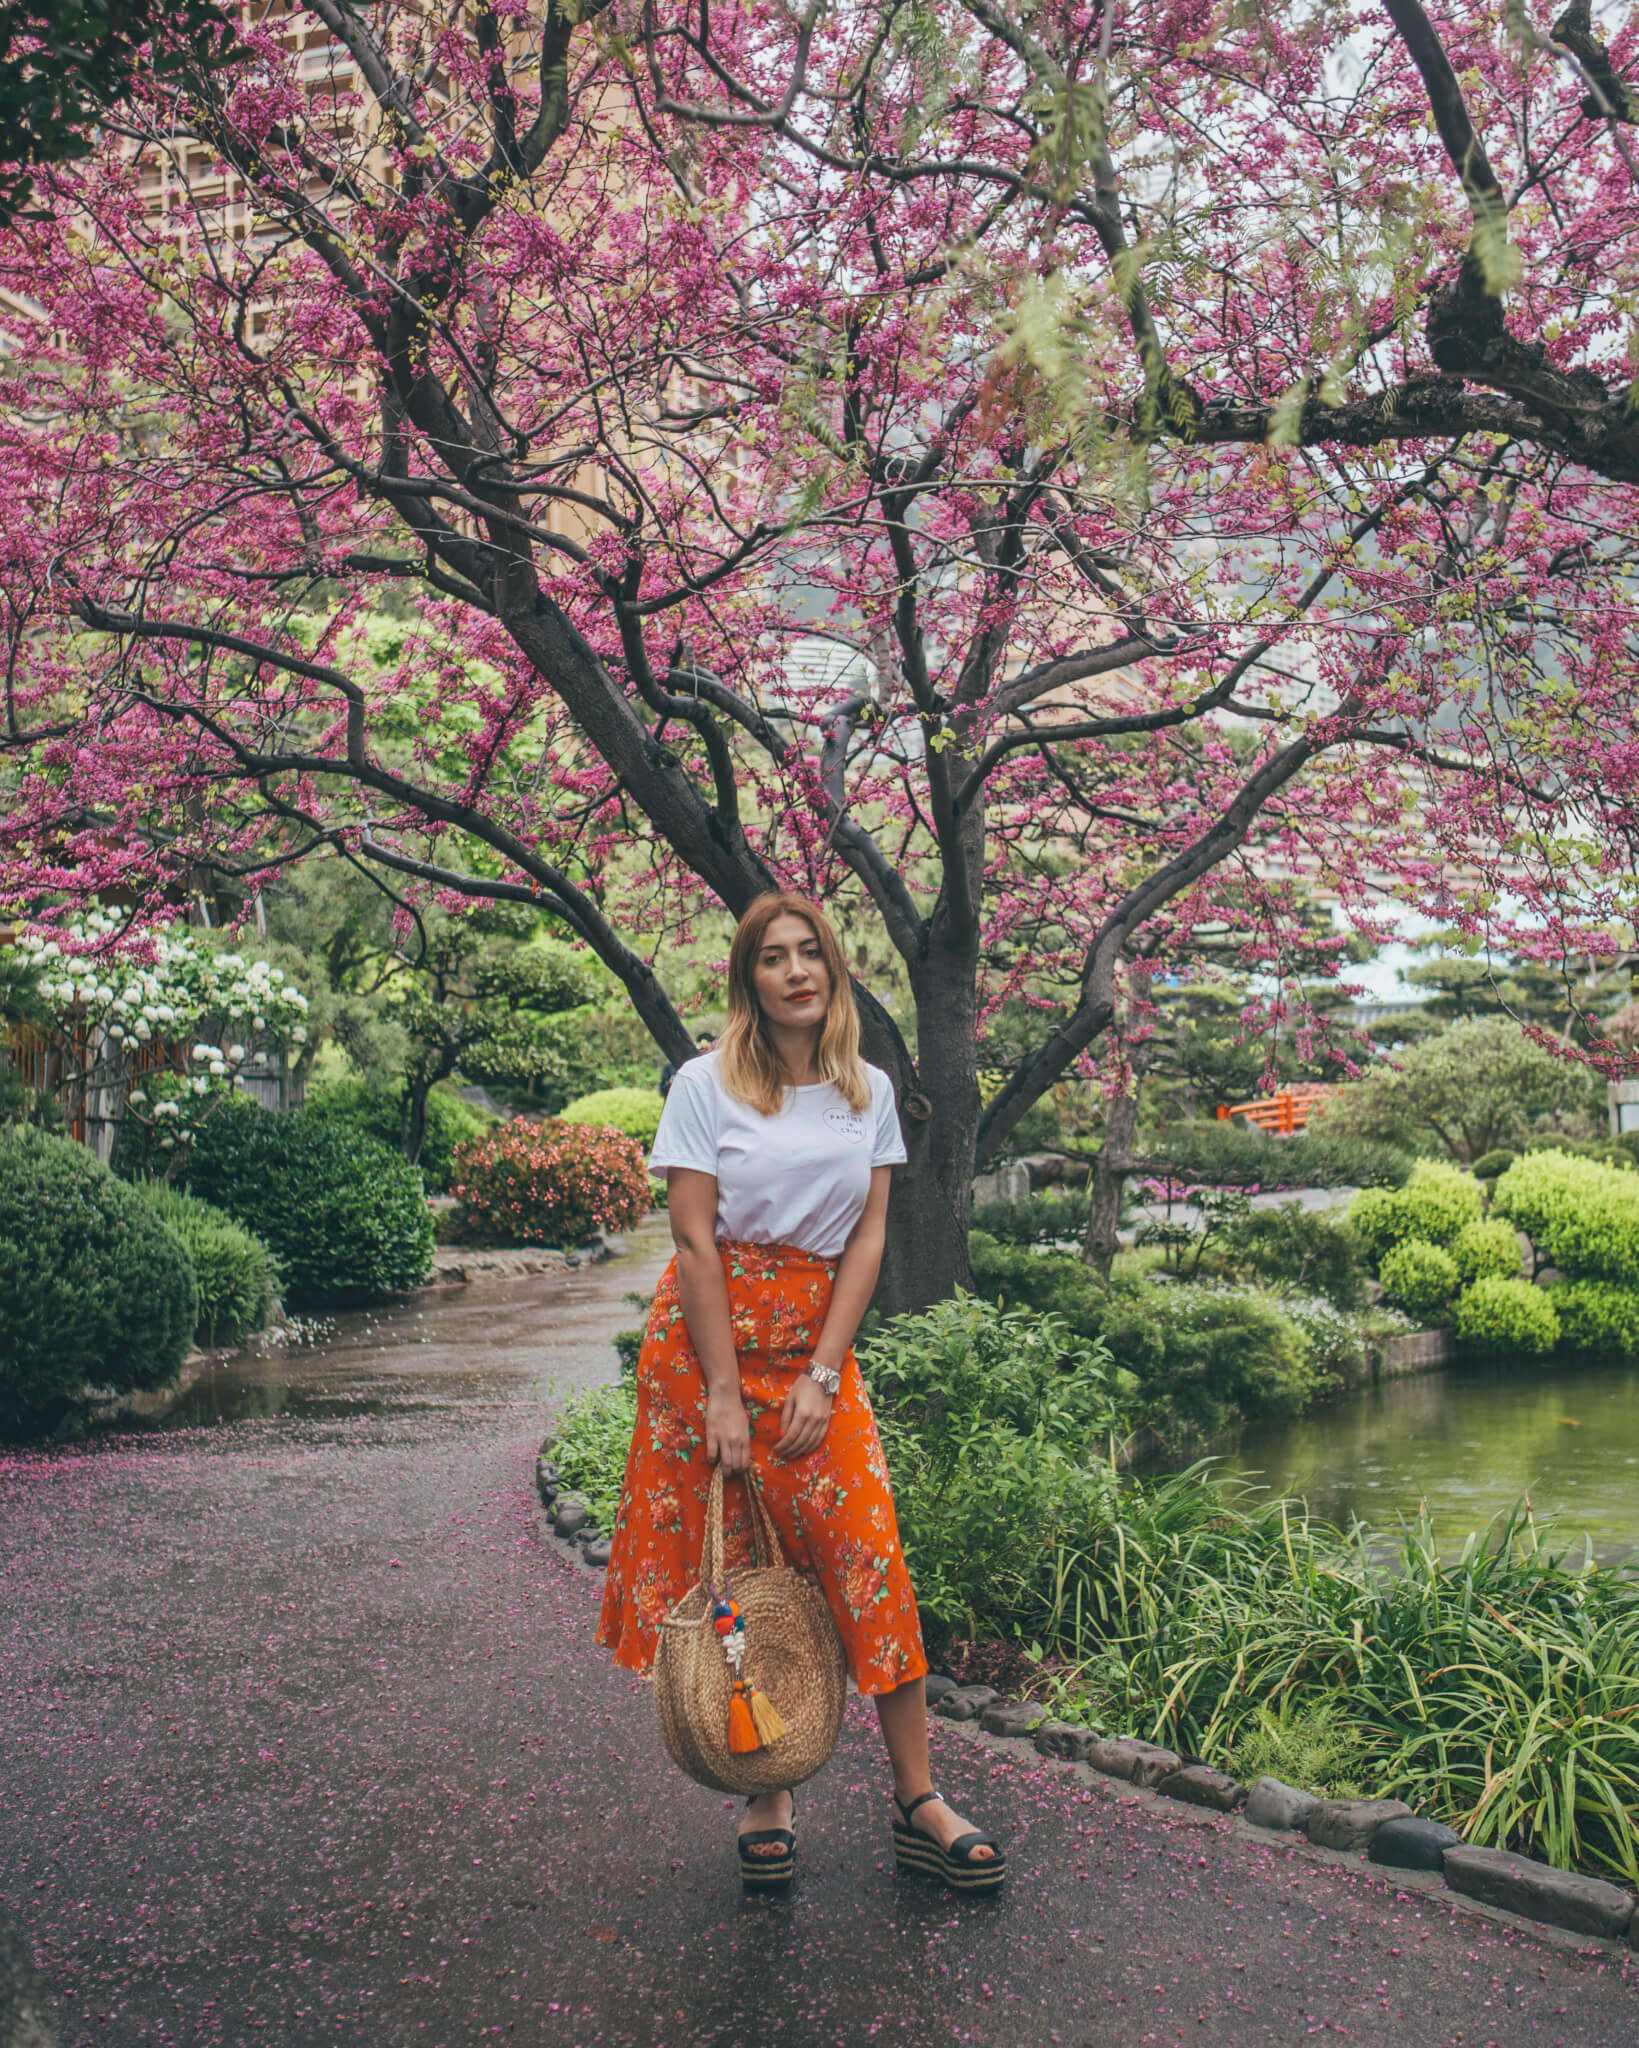 And-Other-Stories-Japanese-Garden-12-of-12-1 Japanese Garden Monaco - What I Wore